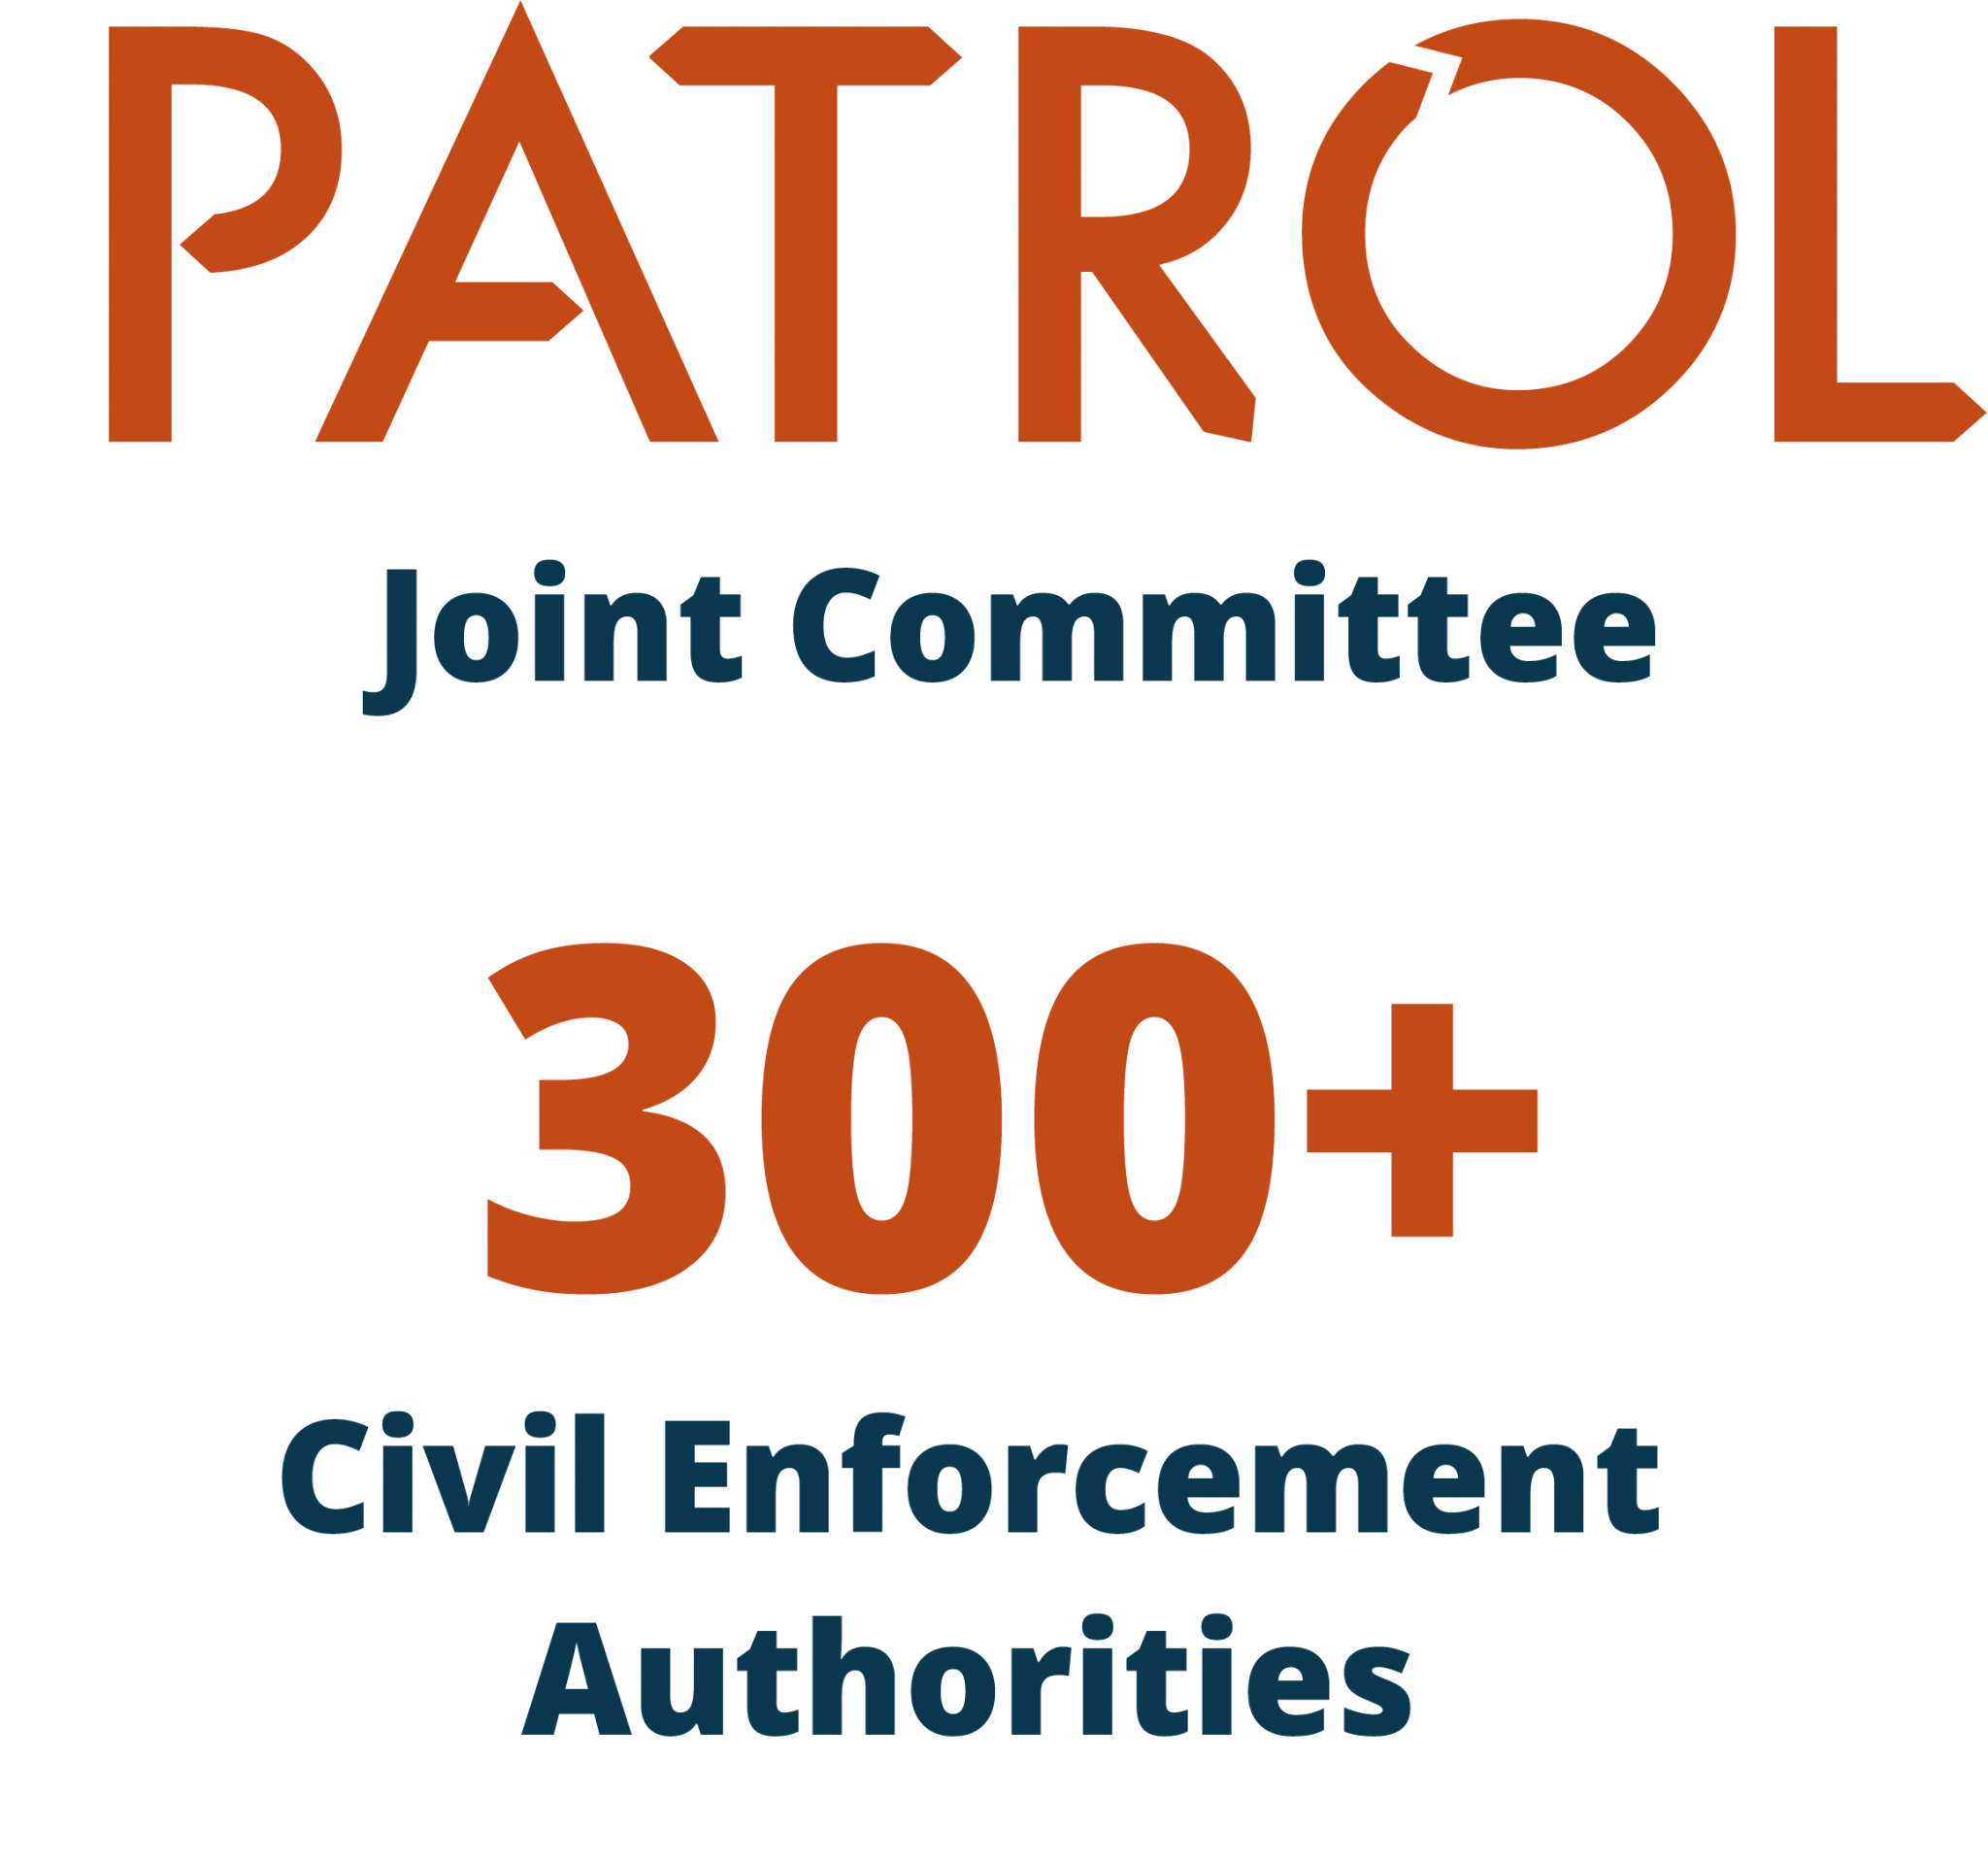 Parking and Traffic Regulations Outside London is made up of 300 Civil Enforcement Authorities